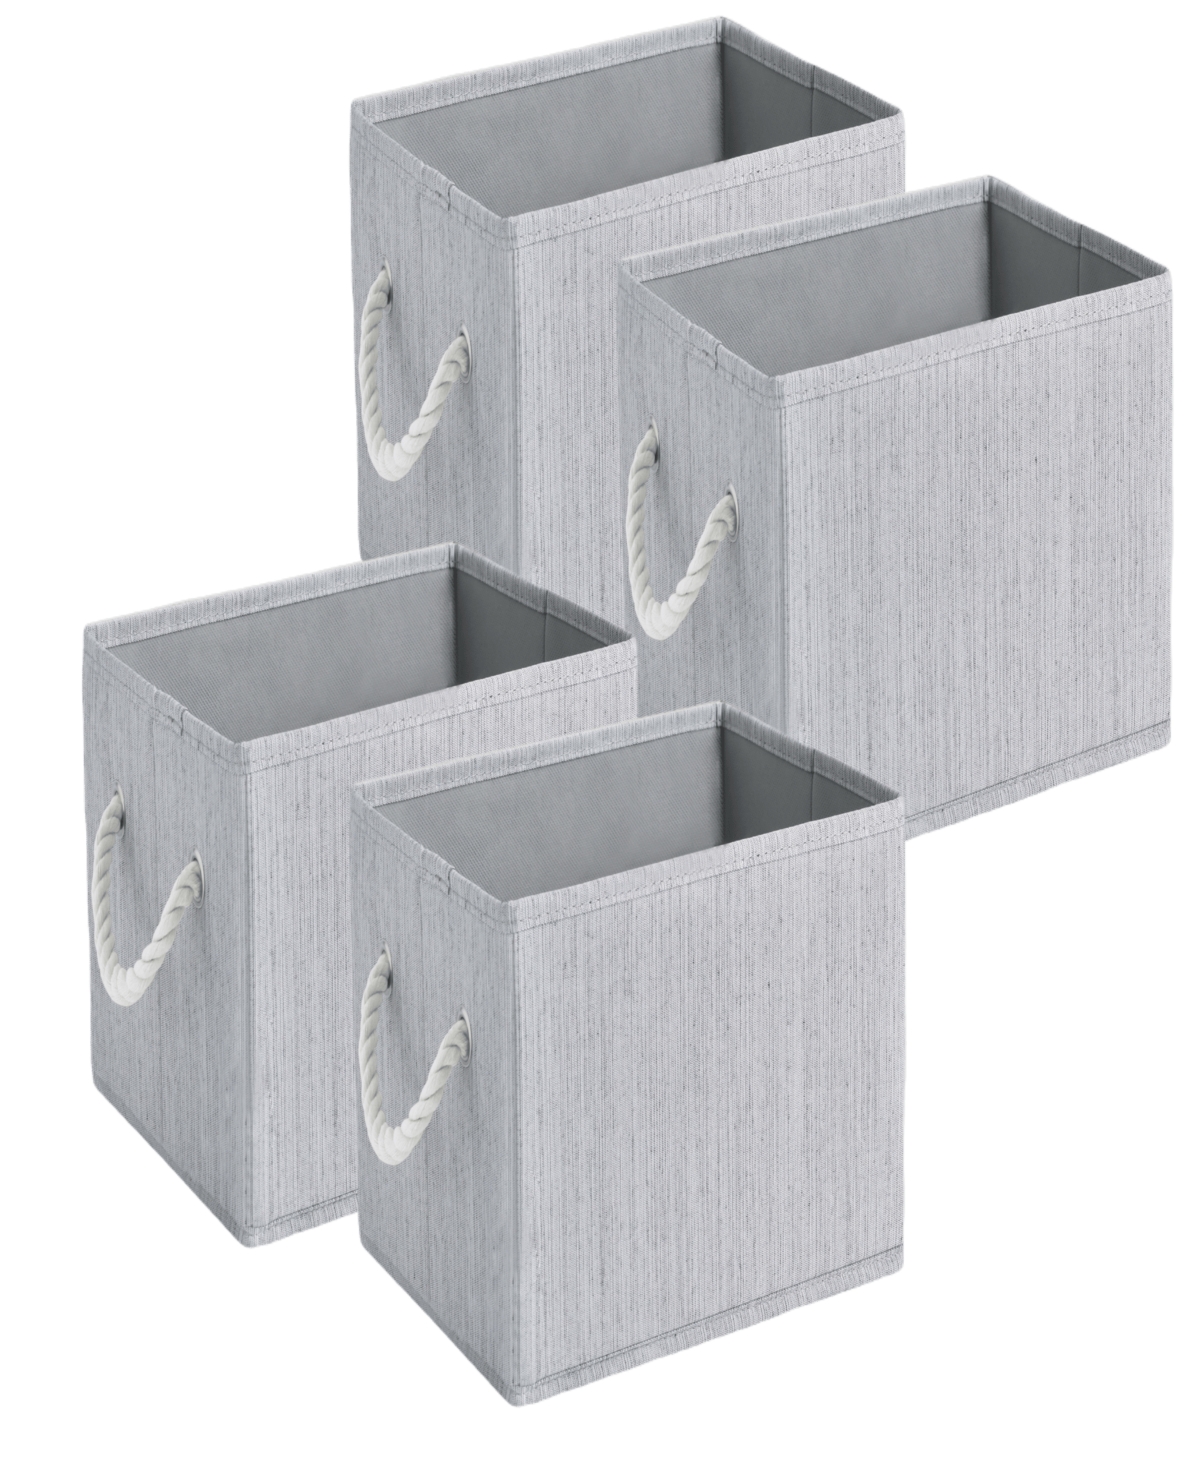 Wethinkstorage 11 Litre Collapsible Fabric Storage Bins With Cotton Rope Handles, Set Of 4 In Gray